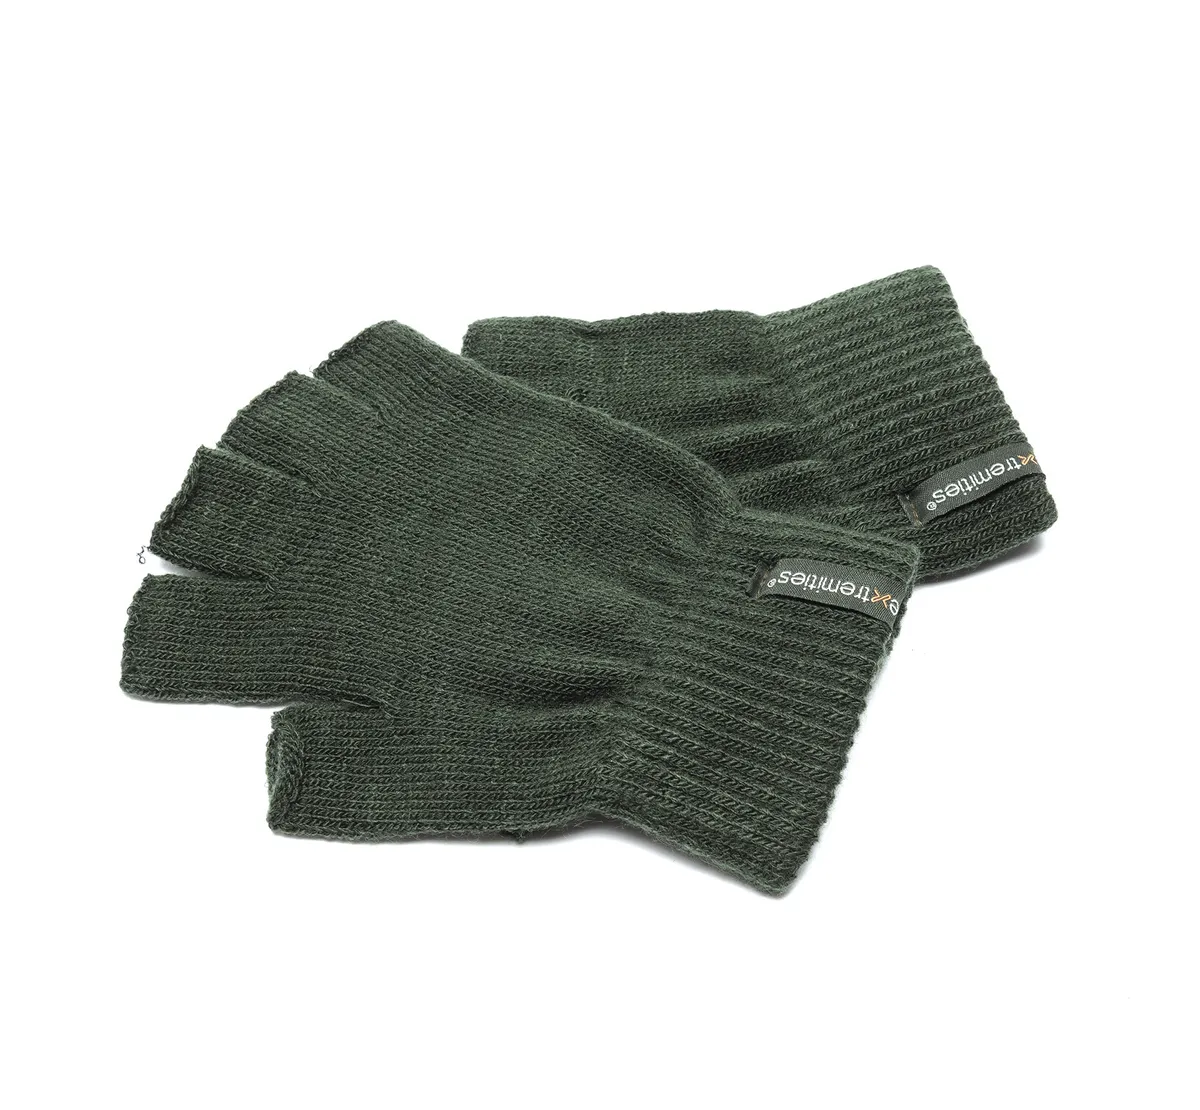 Fingerless Thinny Glove by Extremities